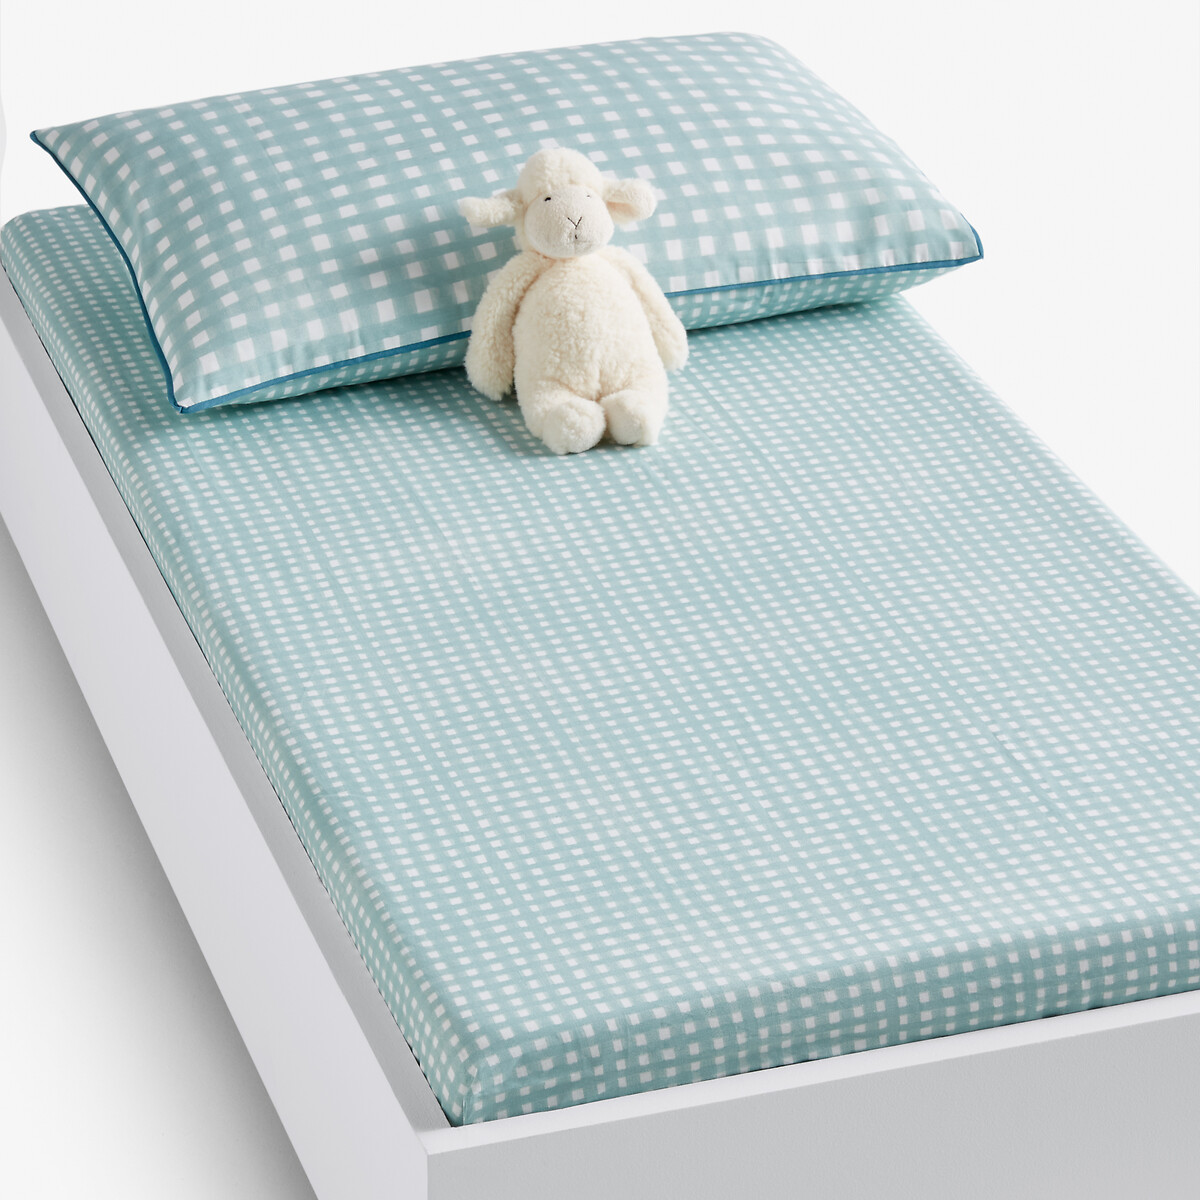 Plain & Printed Cot Bed Fitted Sheet 100% Cotton Soft Jersey 140 x 70 cm 